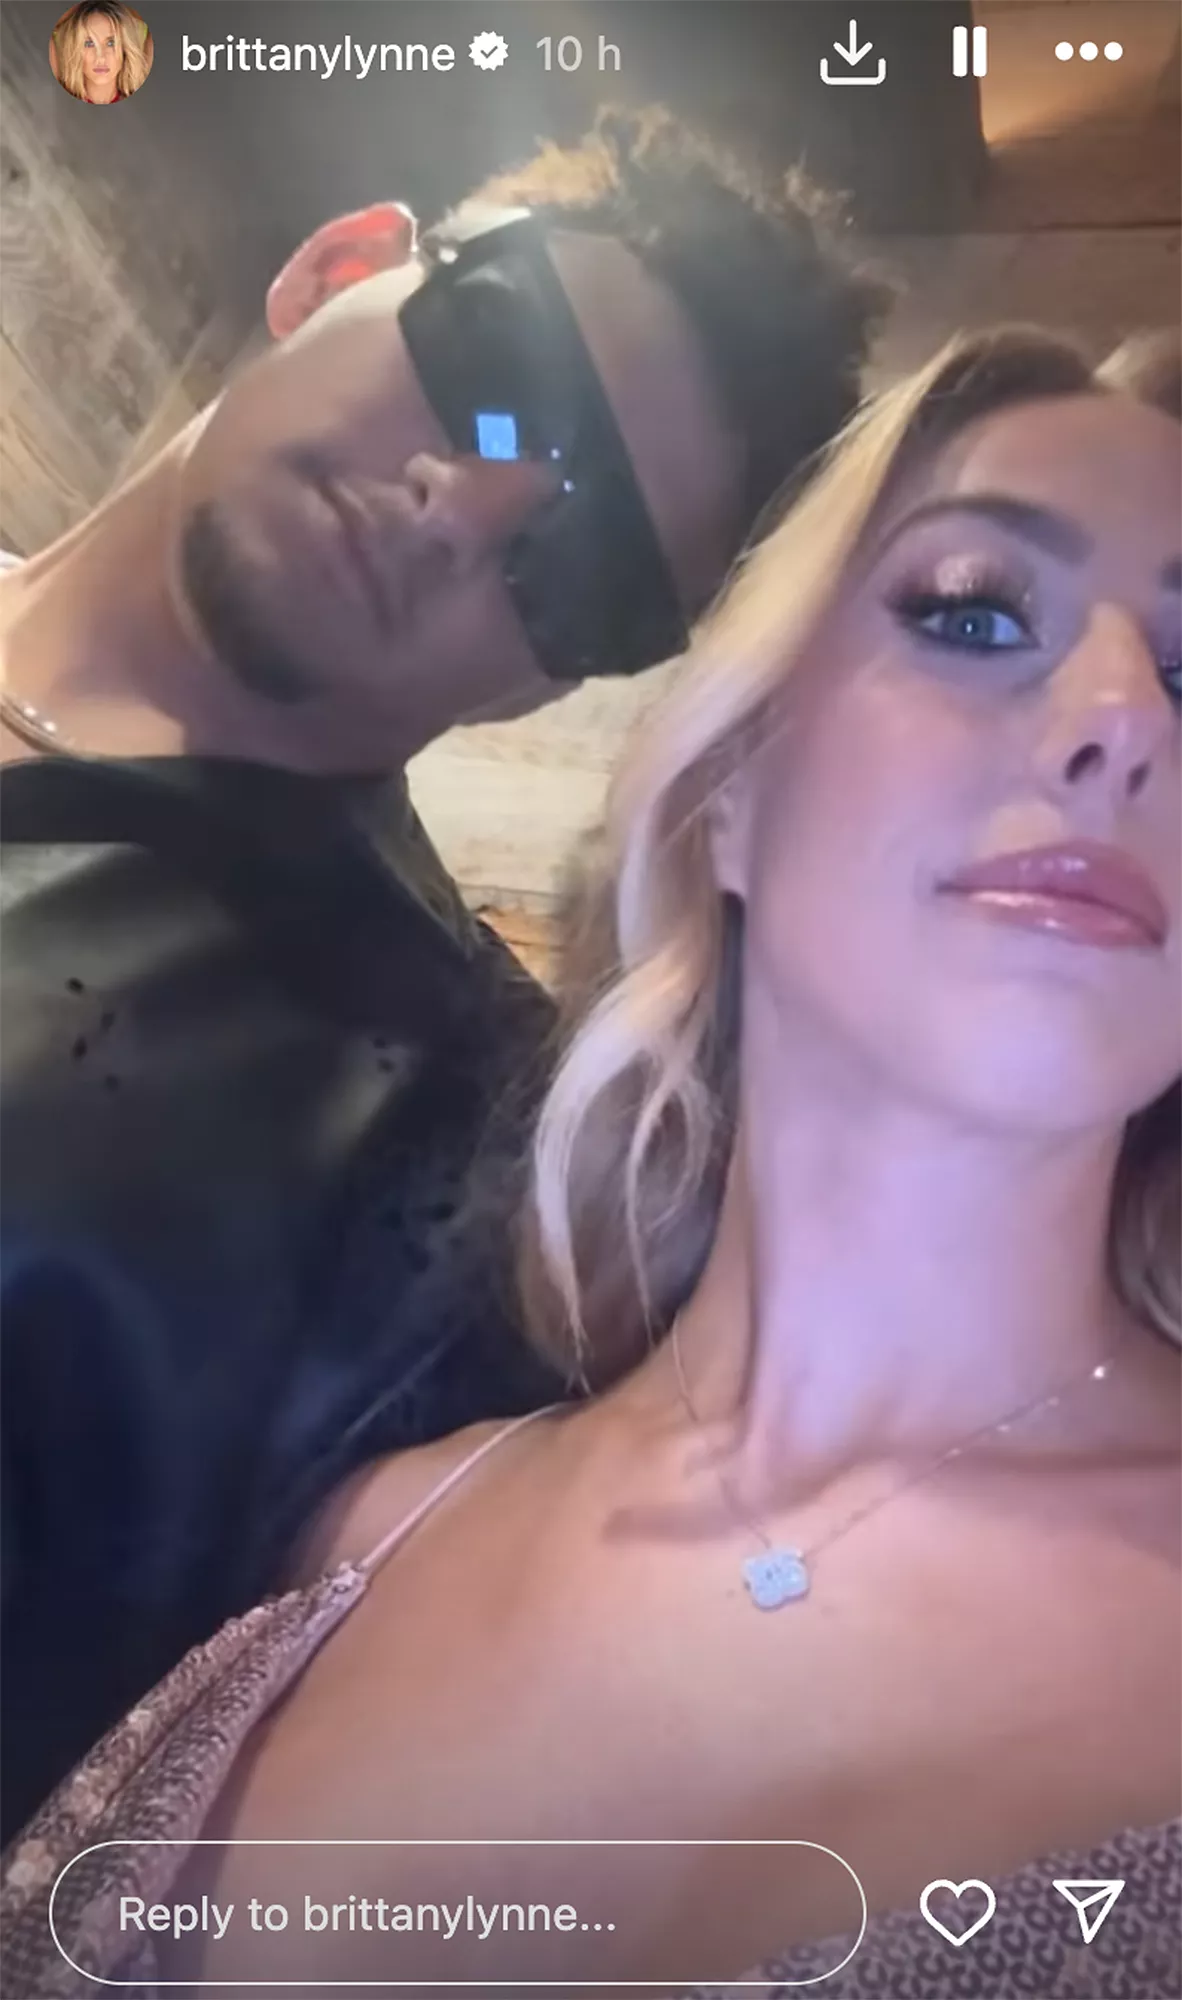 Brittany and Patrick Mahomes Have Glam Date Night in Miami